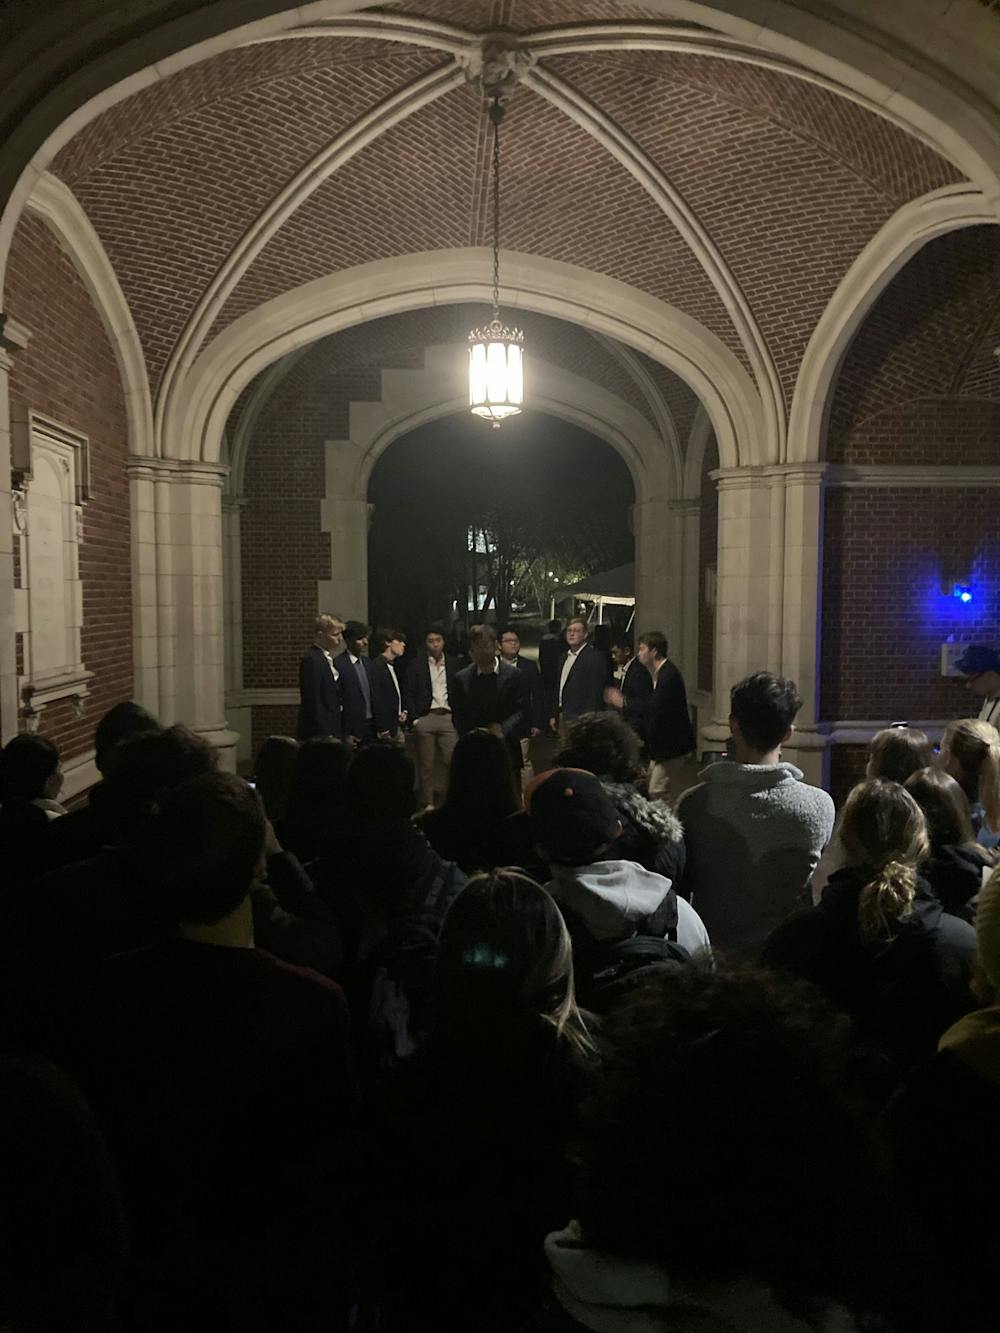 <h5>The Tigertones perform at a 1879 Hall arch sing this month.&nbsp;</h5>
<h6>Cathleen Weng / The Daily Princetonian</h6>